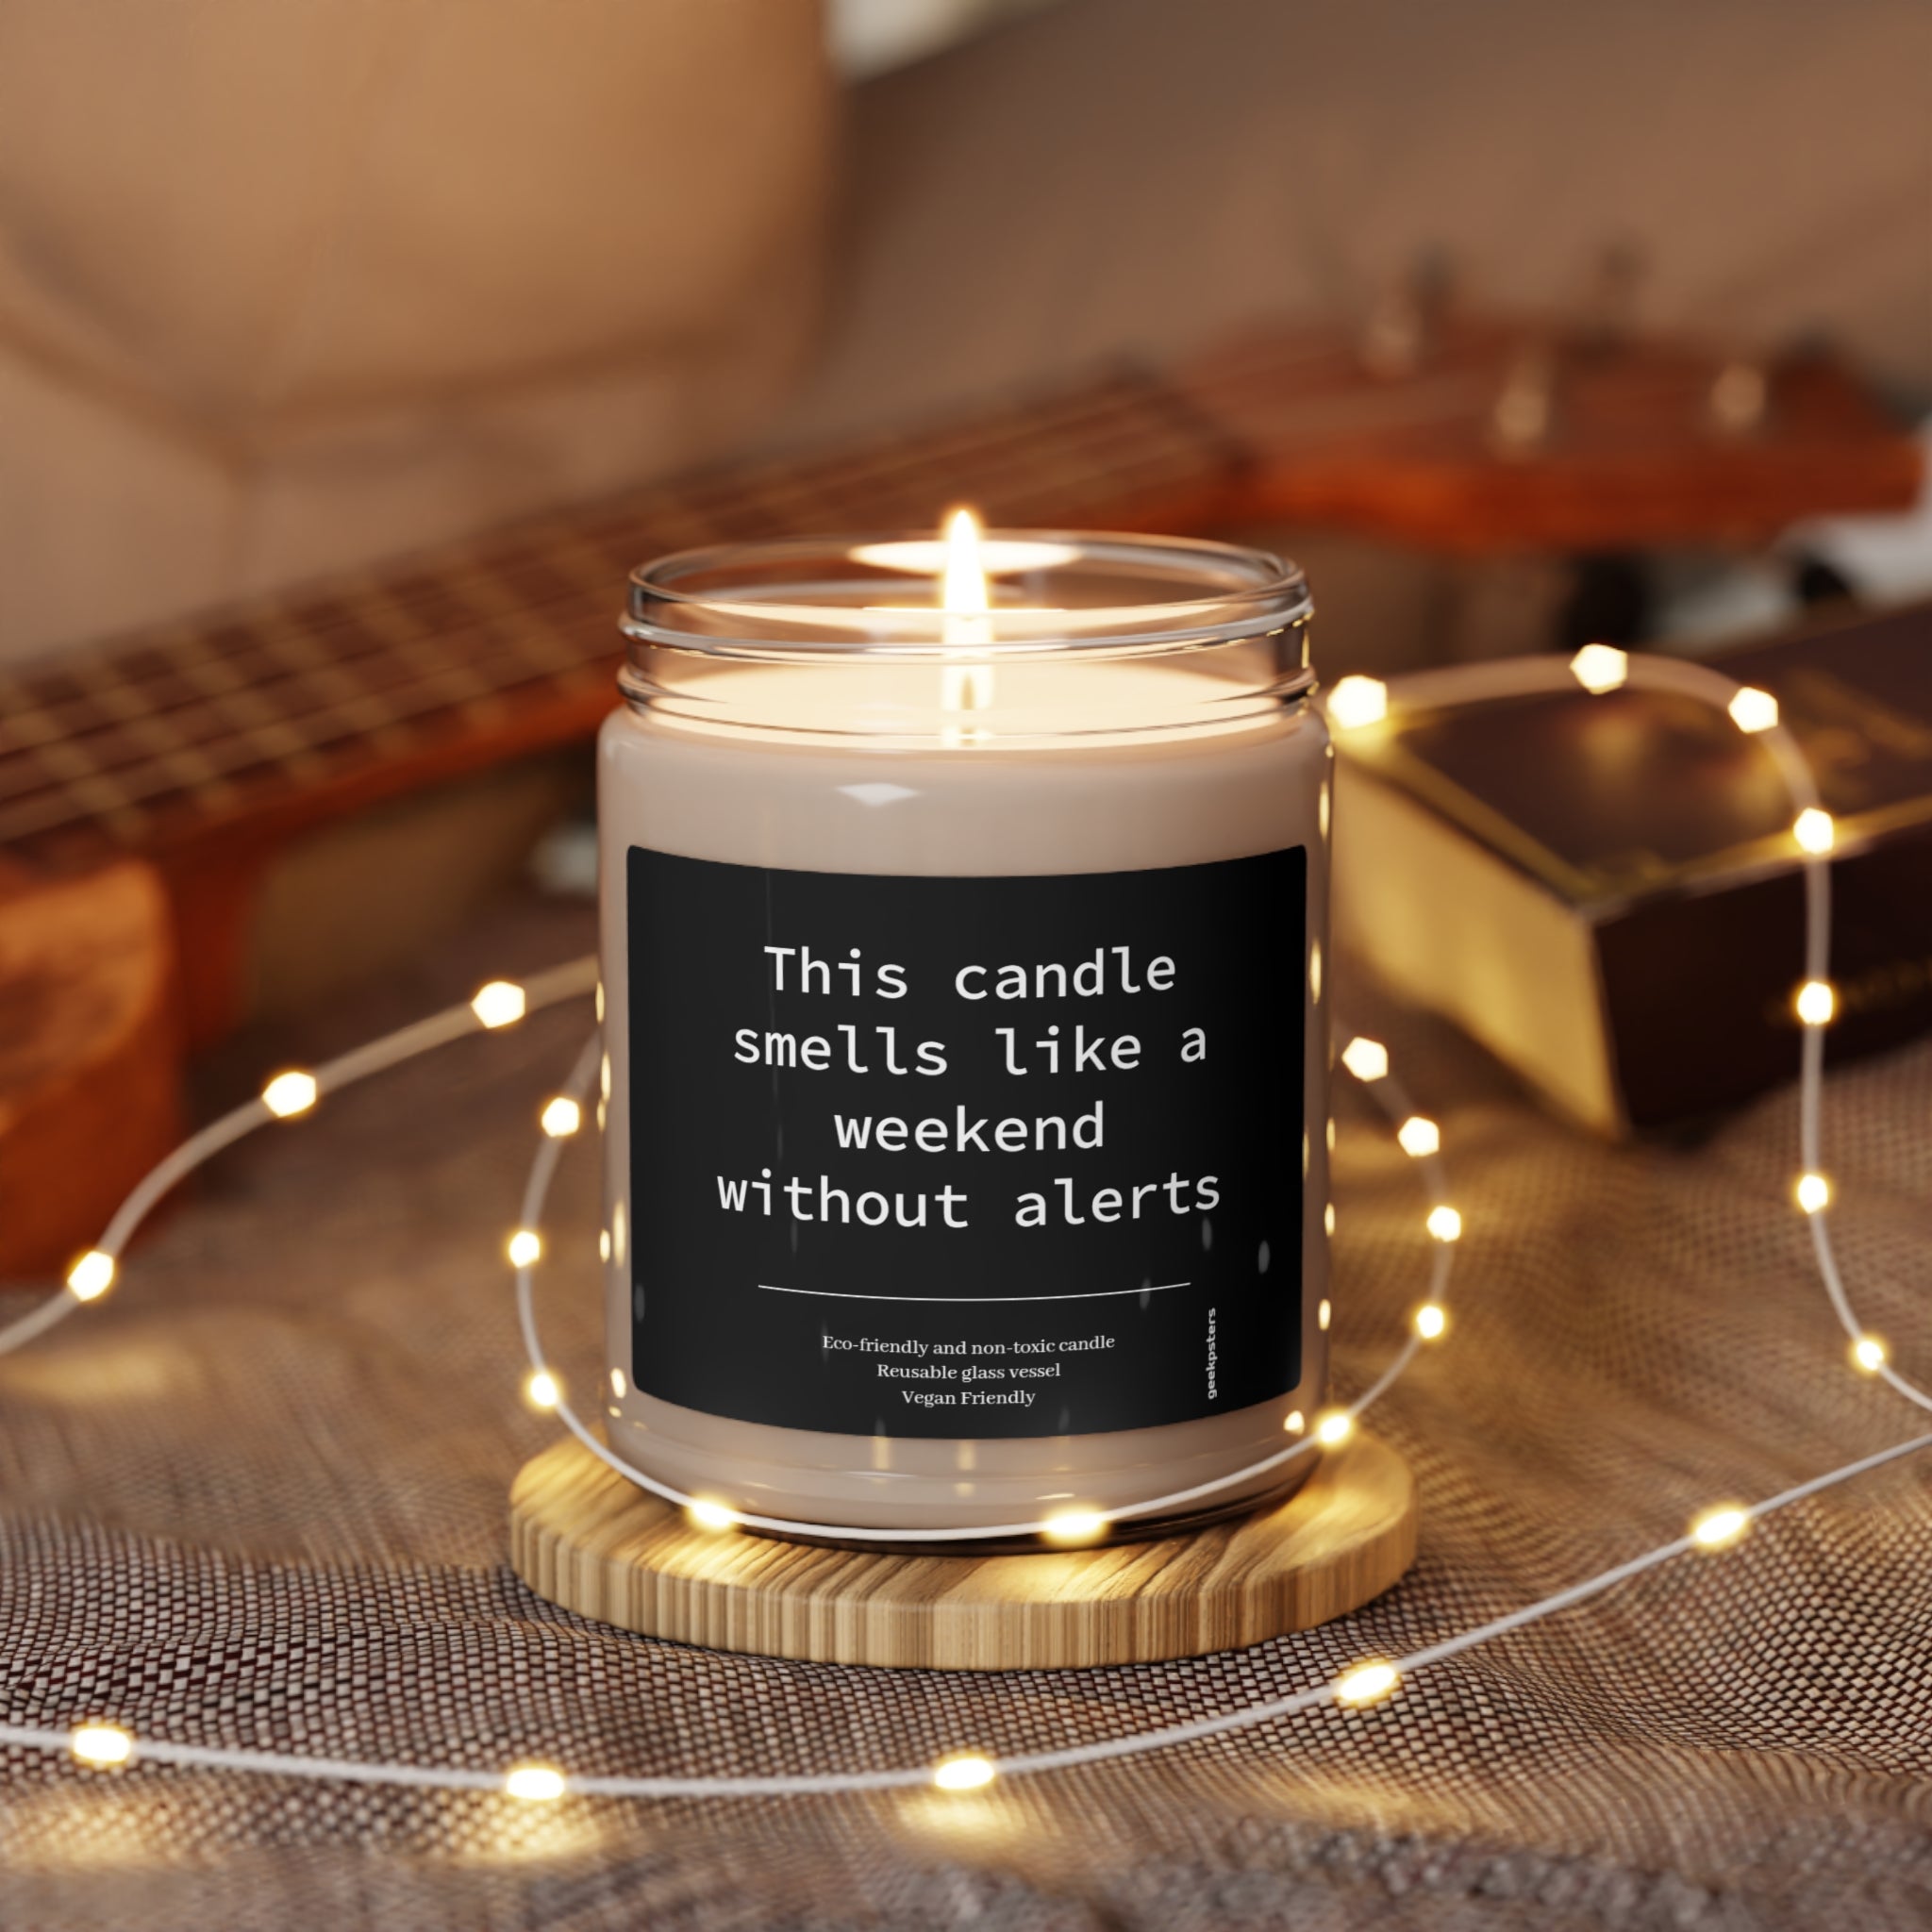 A "This Candle Smells Like a Weekend Without Alerts - Scented Soy Candle, 9oz" with humorous labeling is lit amidst a cozy setting with warm lights and wooden accents.